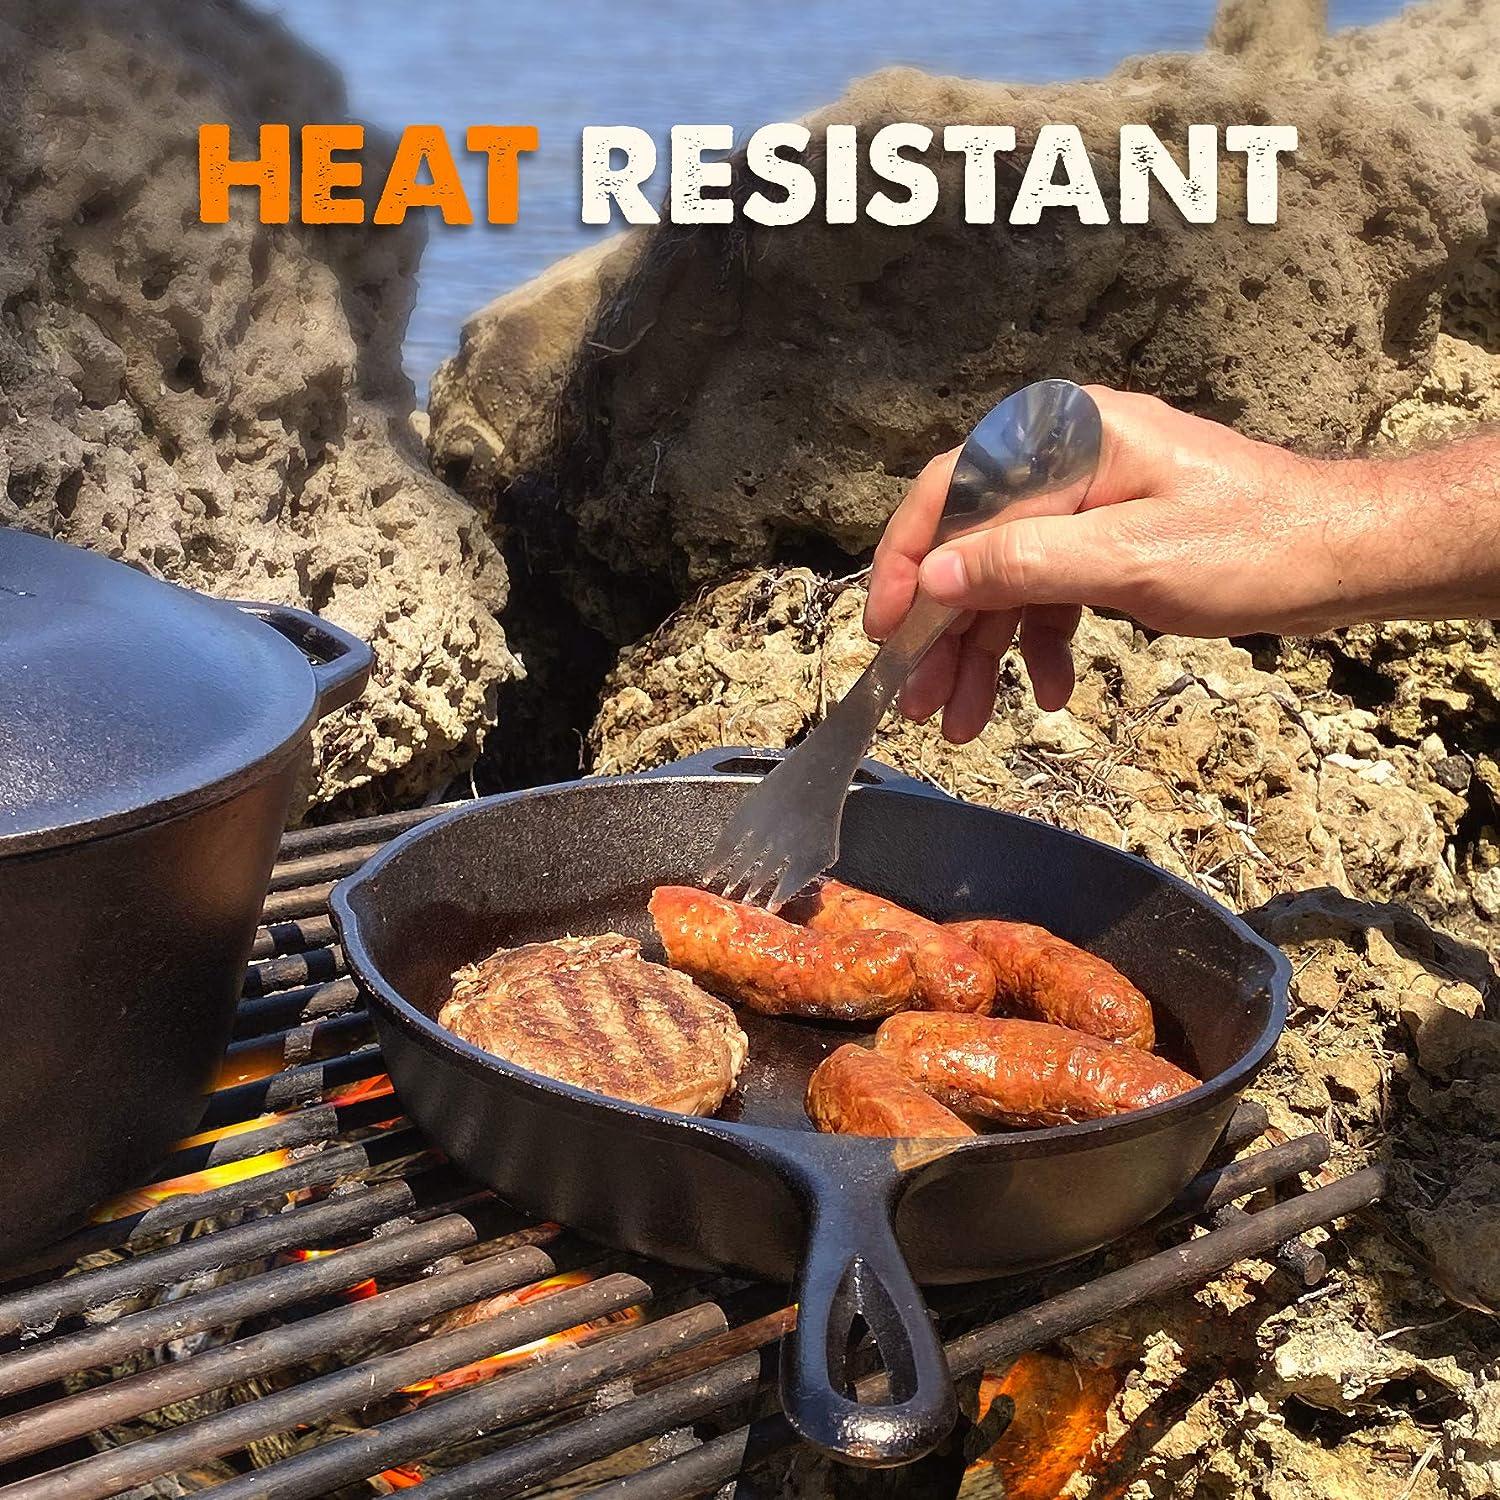 japanese rust resistant stainless steel camping